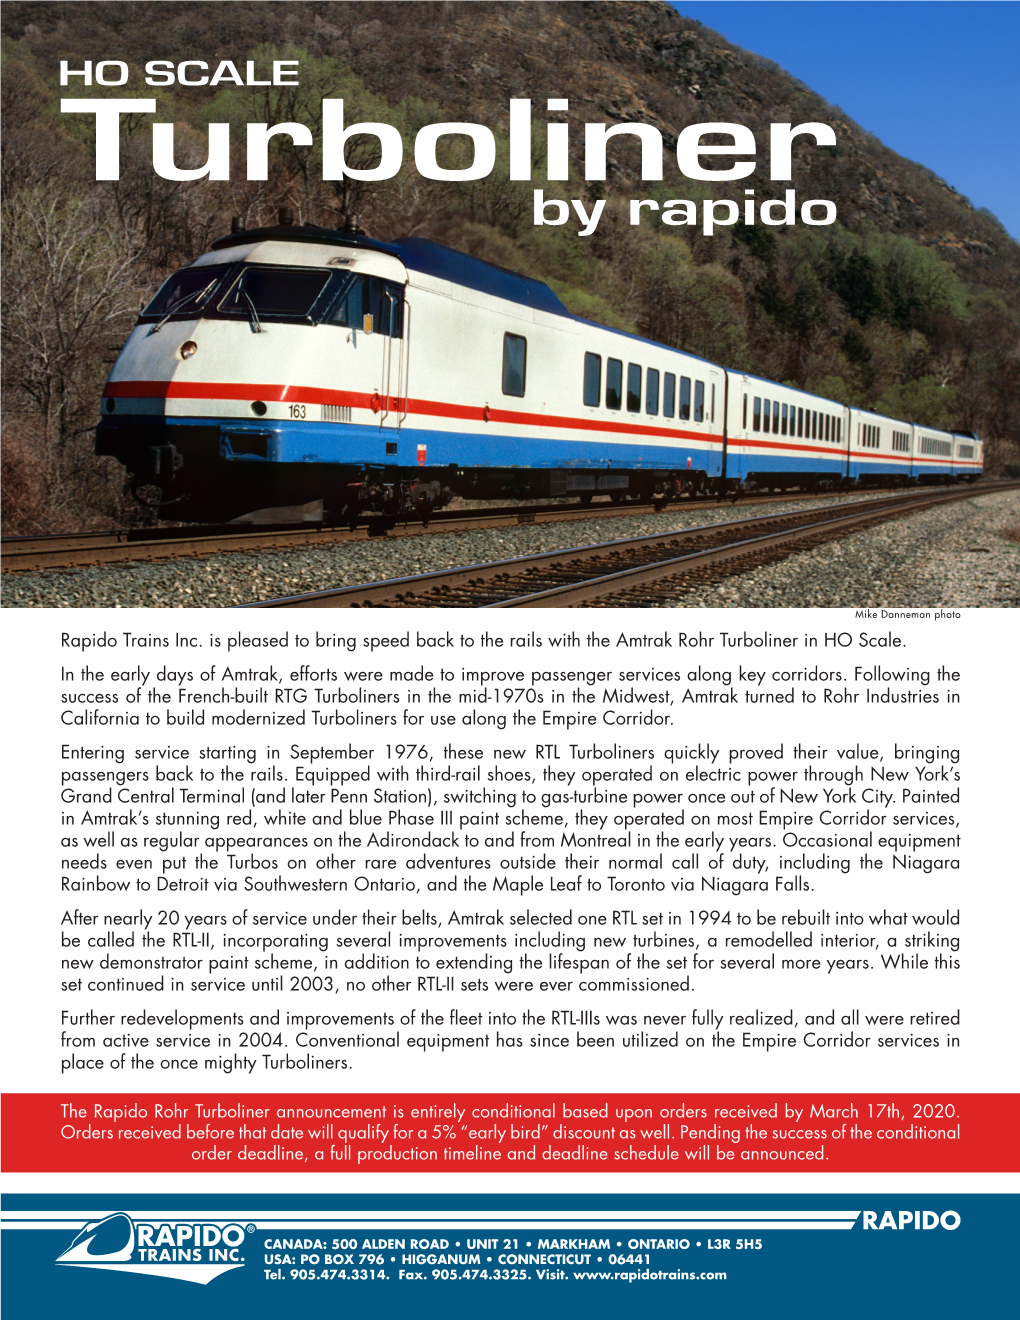 Rapido Trains Inc. Is Pleased to Bring Speed Back to the Rails with the Amtrak Rohr Turboliner in HO Scale. in the Early Days Of